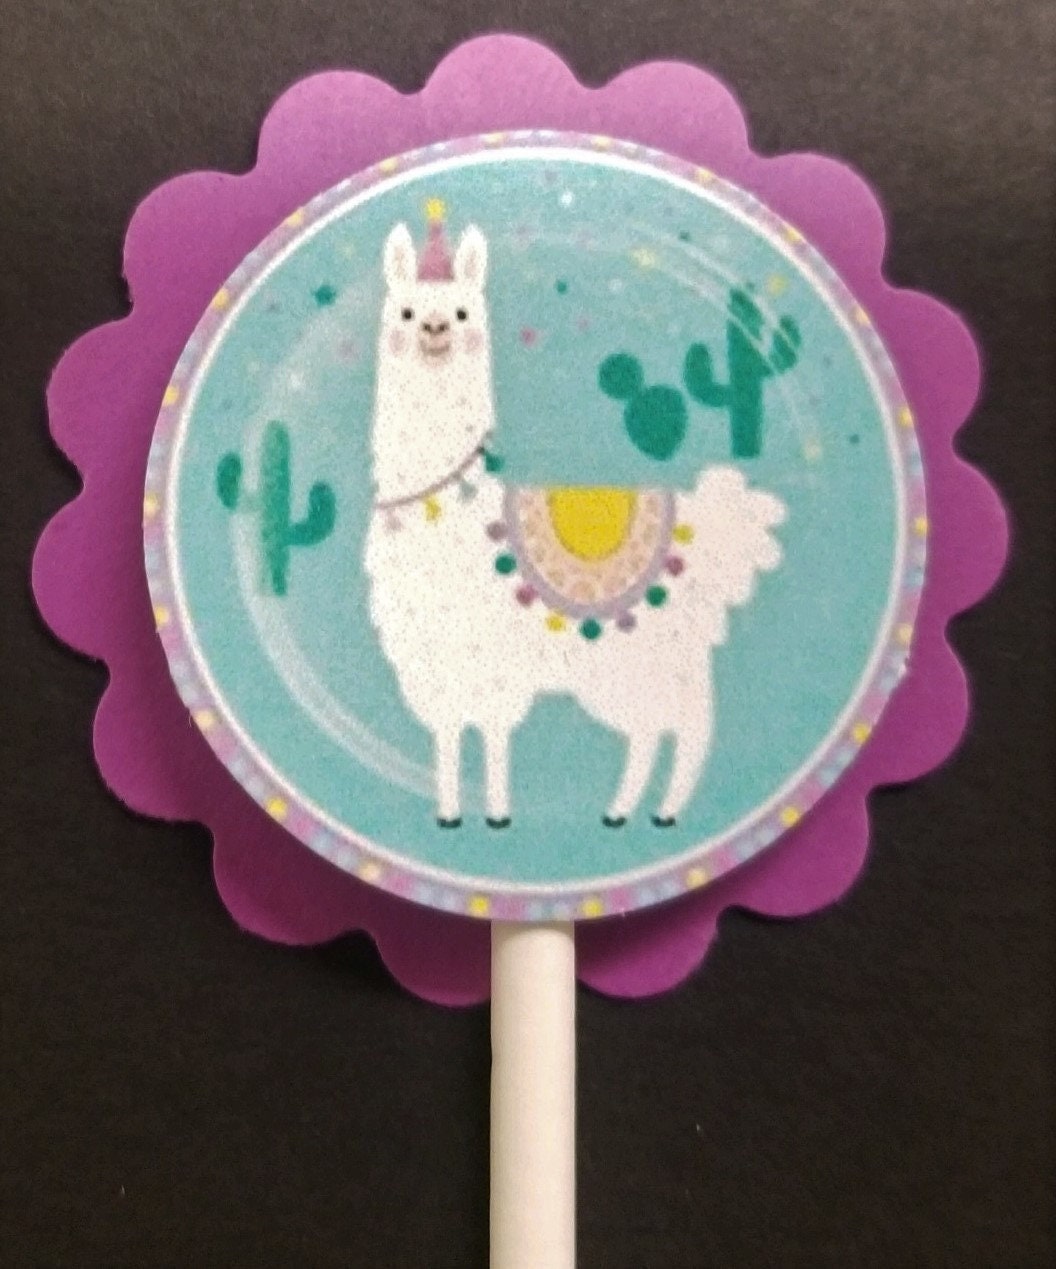 LLAMA FIESTA 24 PC CUPCAKE SET TOPPERS & WRAPPERS PARTY SUPPLIES BIRTHDAY ALPACA 